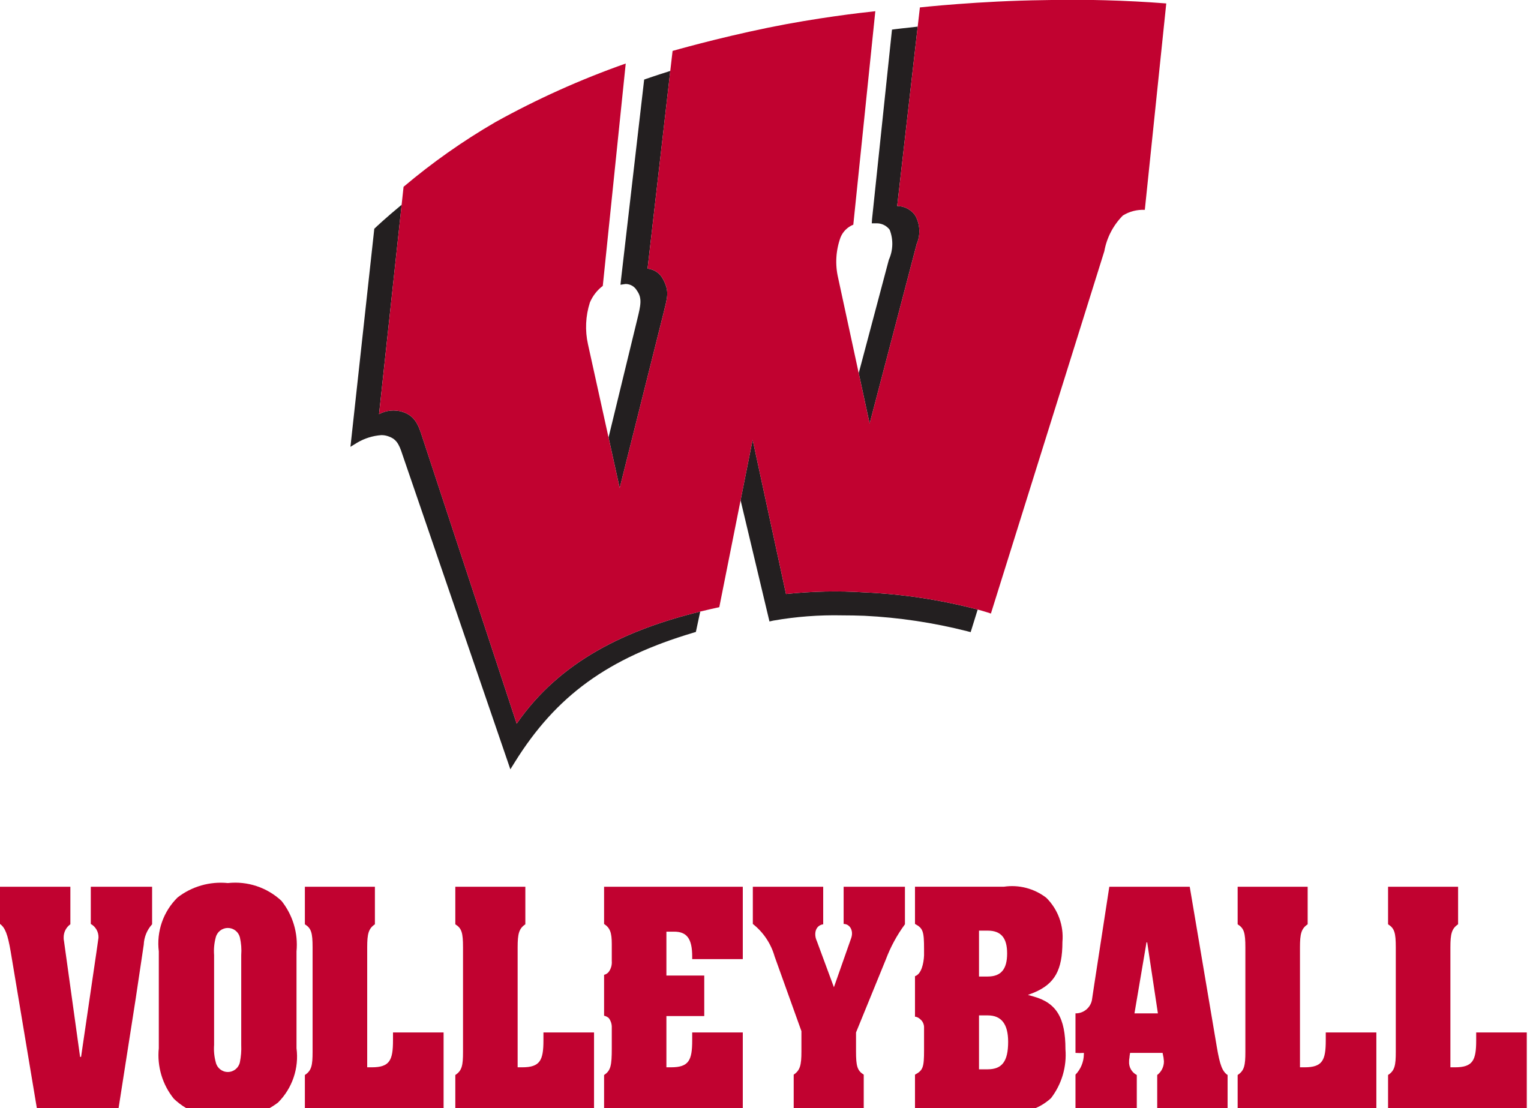 Wisconsin volleyball team leaked unedited Link